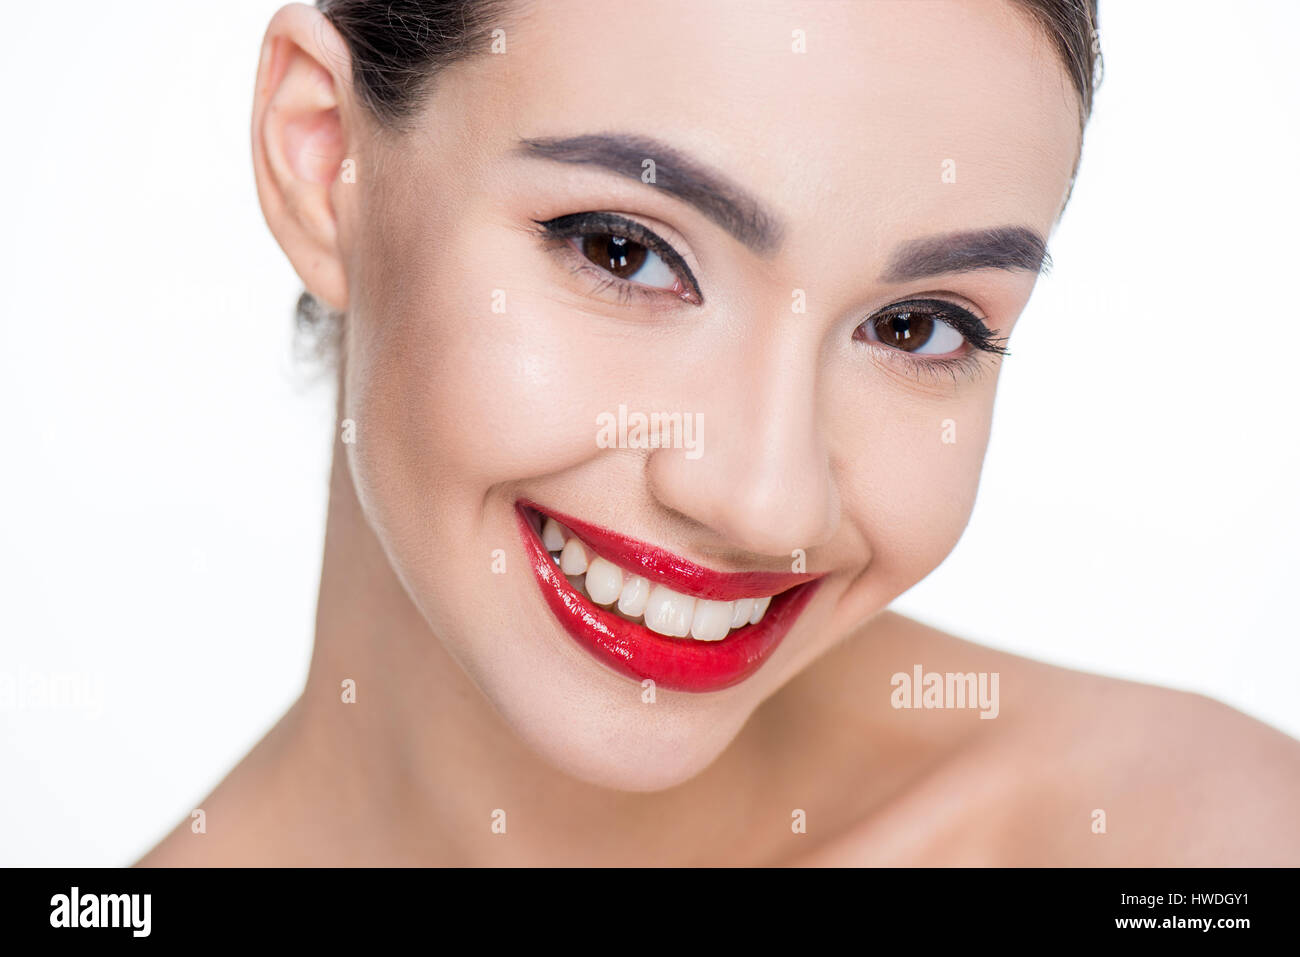 portrait of smiling woman with red lips on white Stock Photo